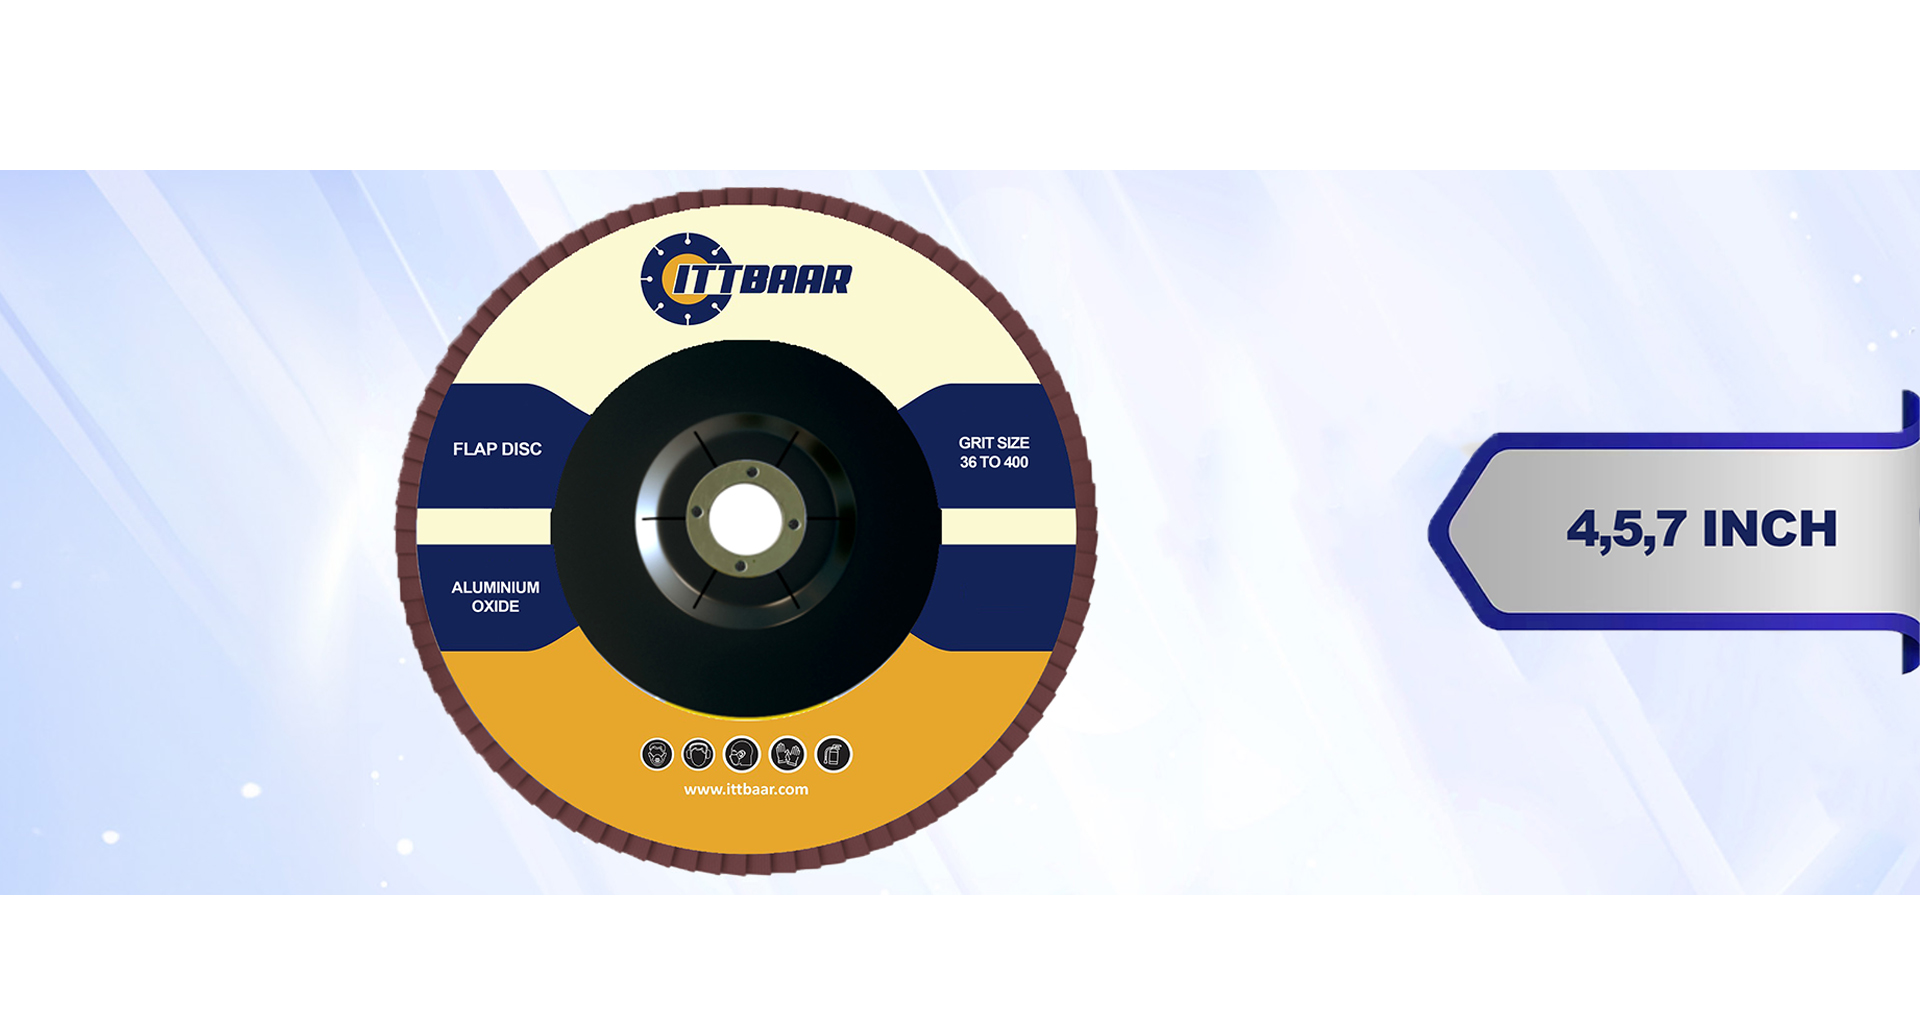 Flap disc, cutting disc, grinding disc , mop wheels, abrasive belts and many more